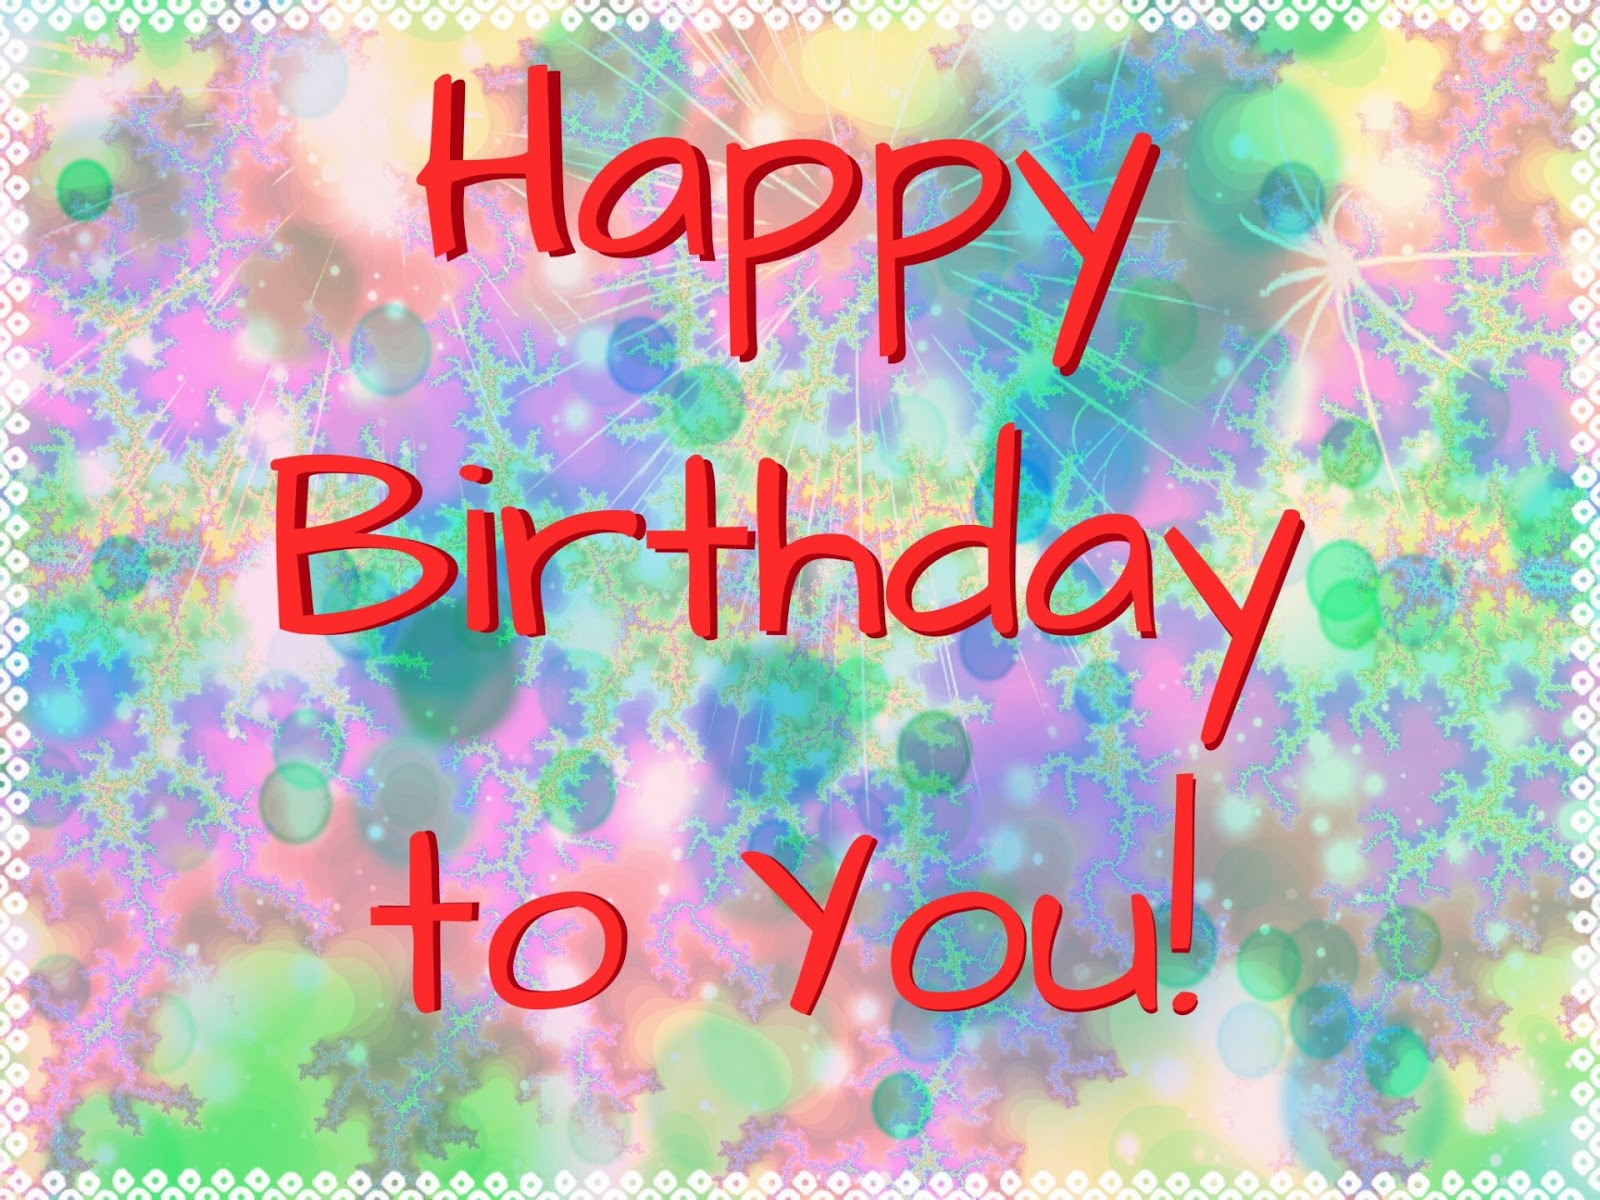 Top 50+ Happy Birthday Wishes For Best Friend - TopBirthdayQuotes